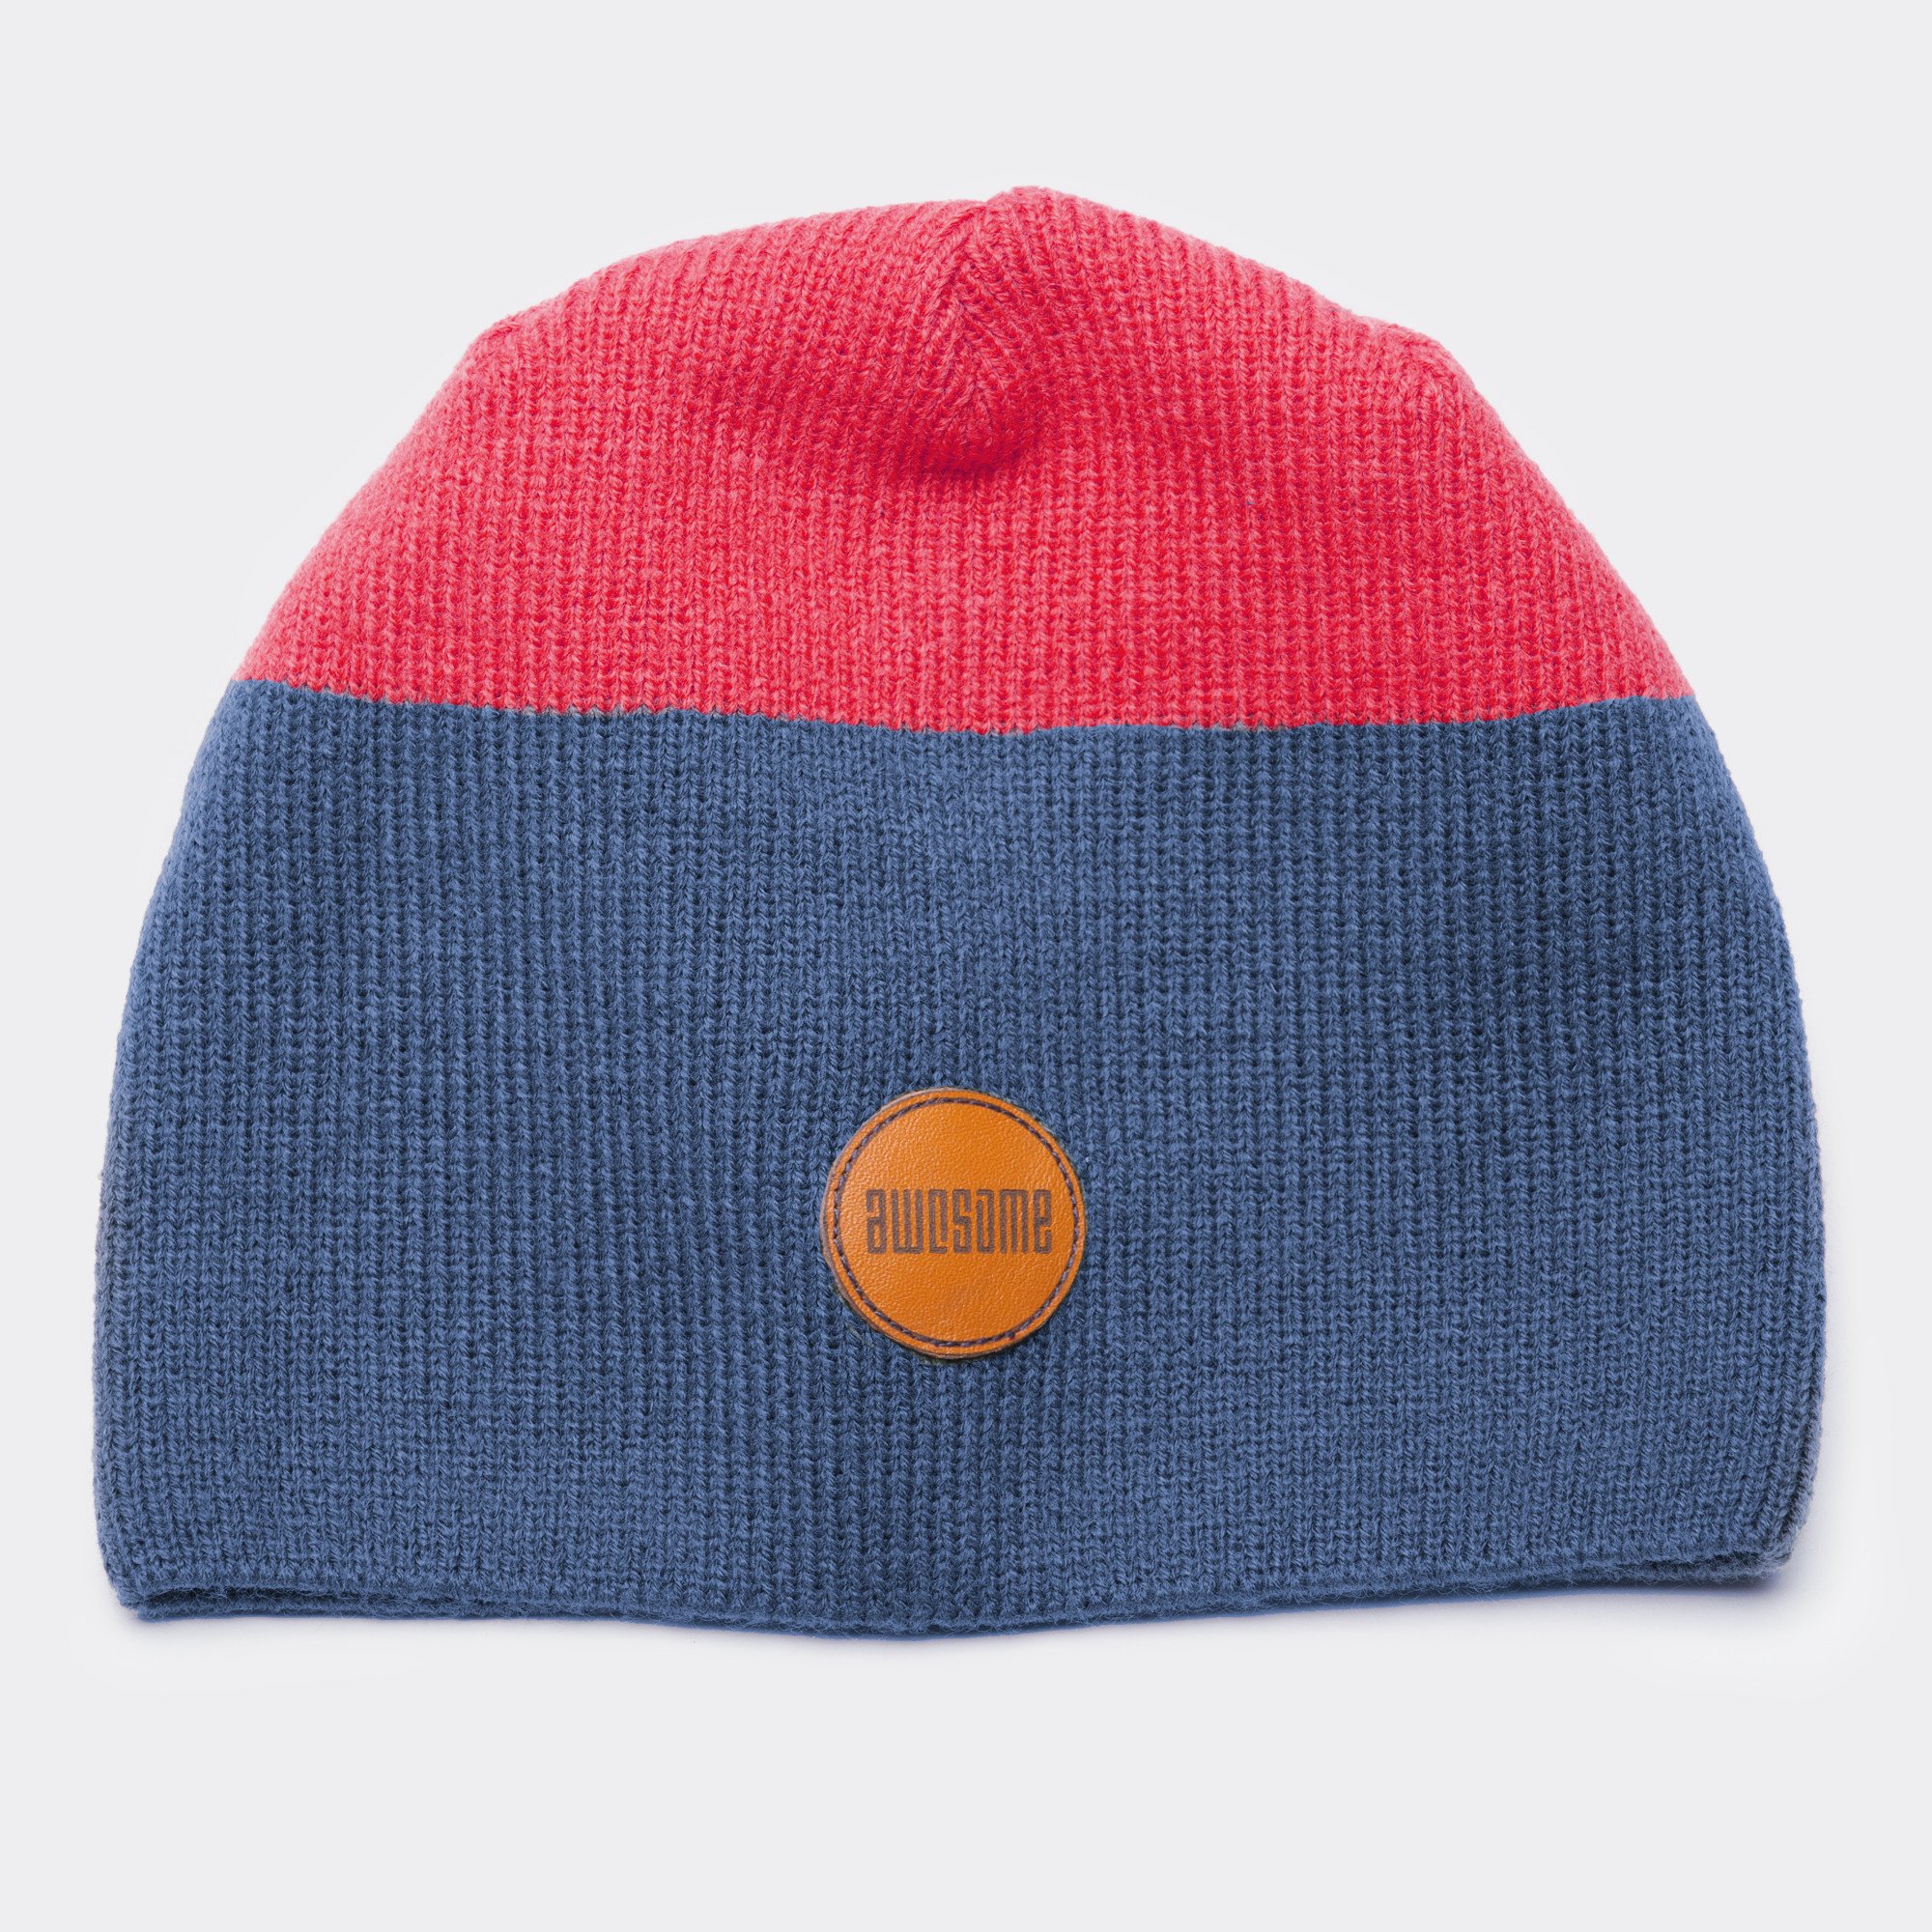 Awesome Beanie Leather Patch - Navy / Red